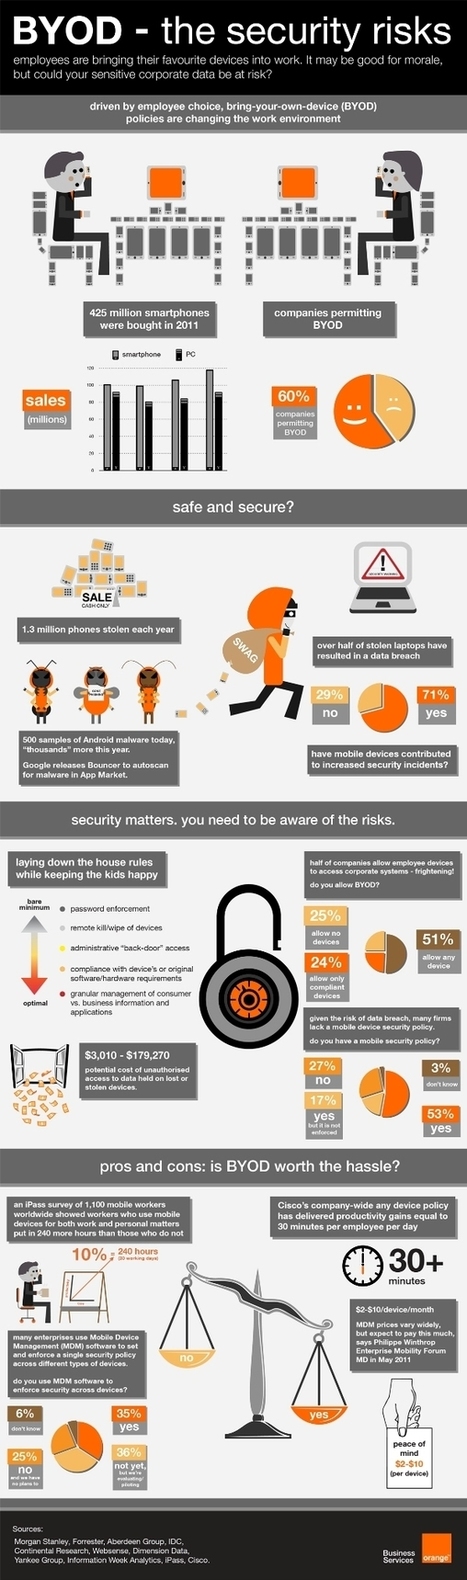 BYOD Security Issues [Infographic] | Tice & Co | Scoop.it